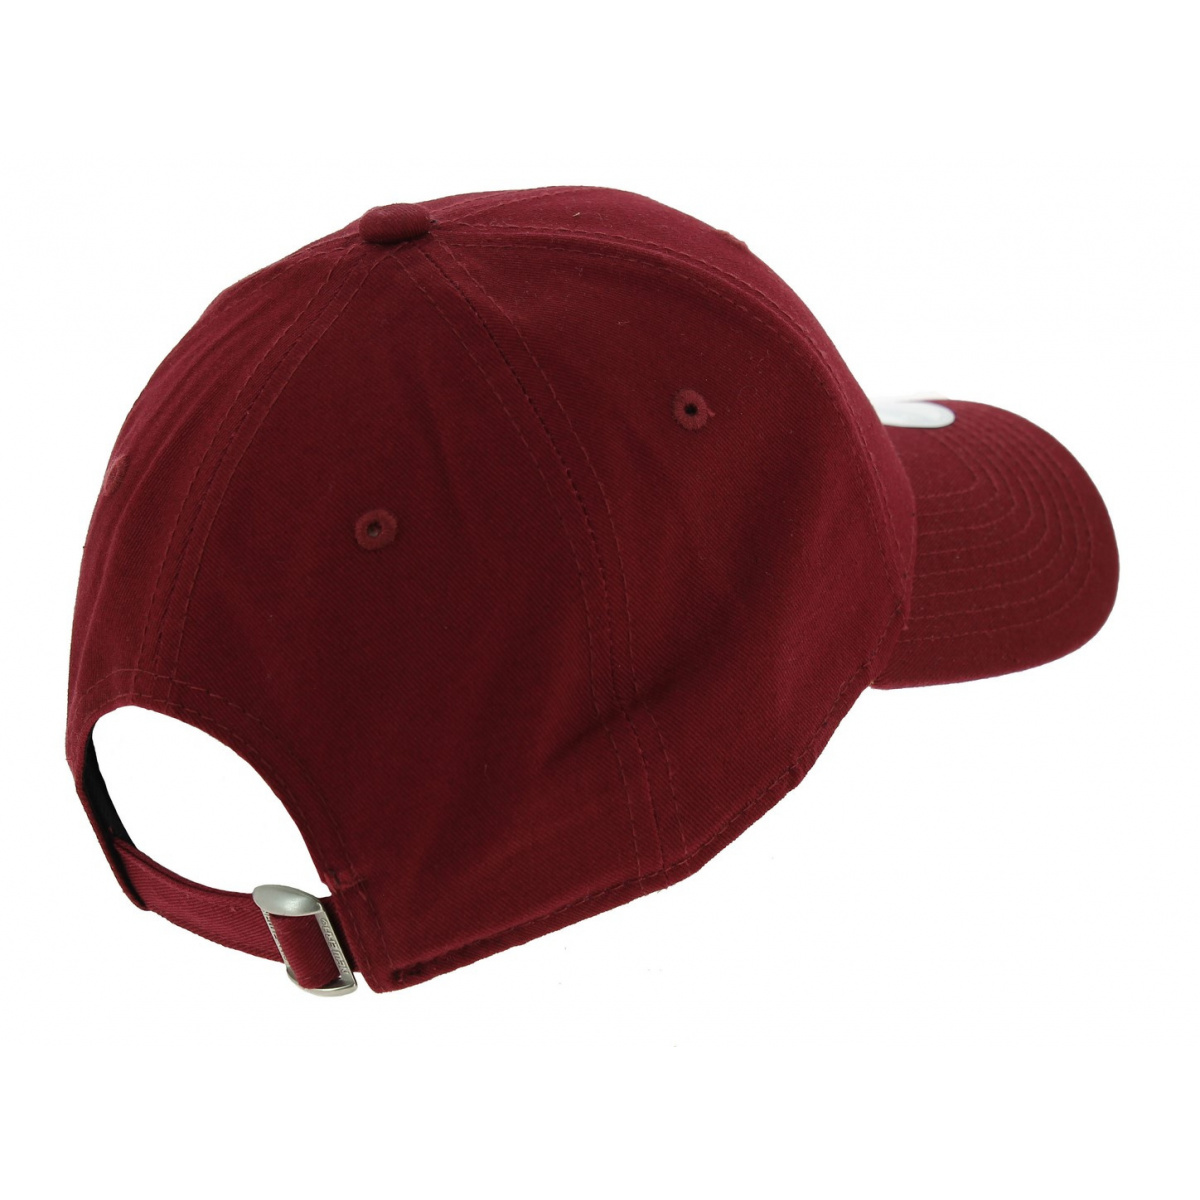 Baseball Cap Essential 940 NY Reference Bordeaux - Chapellerie 7716 Traclet New : Era 